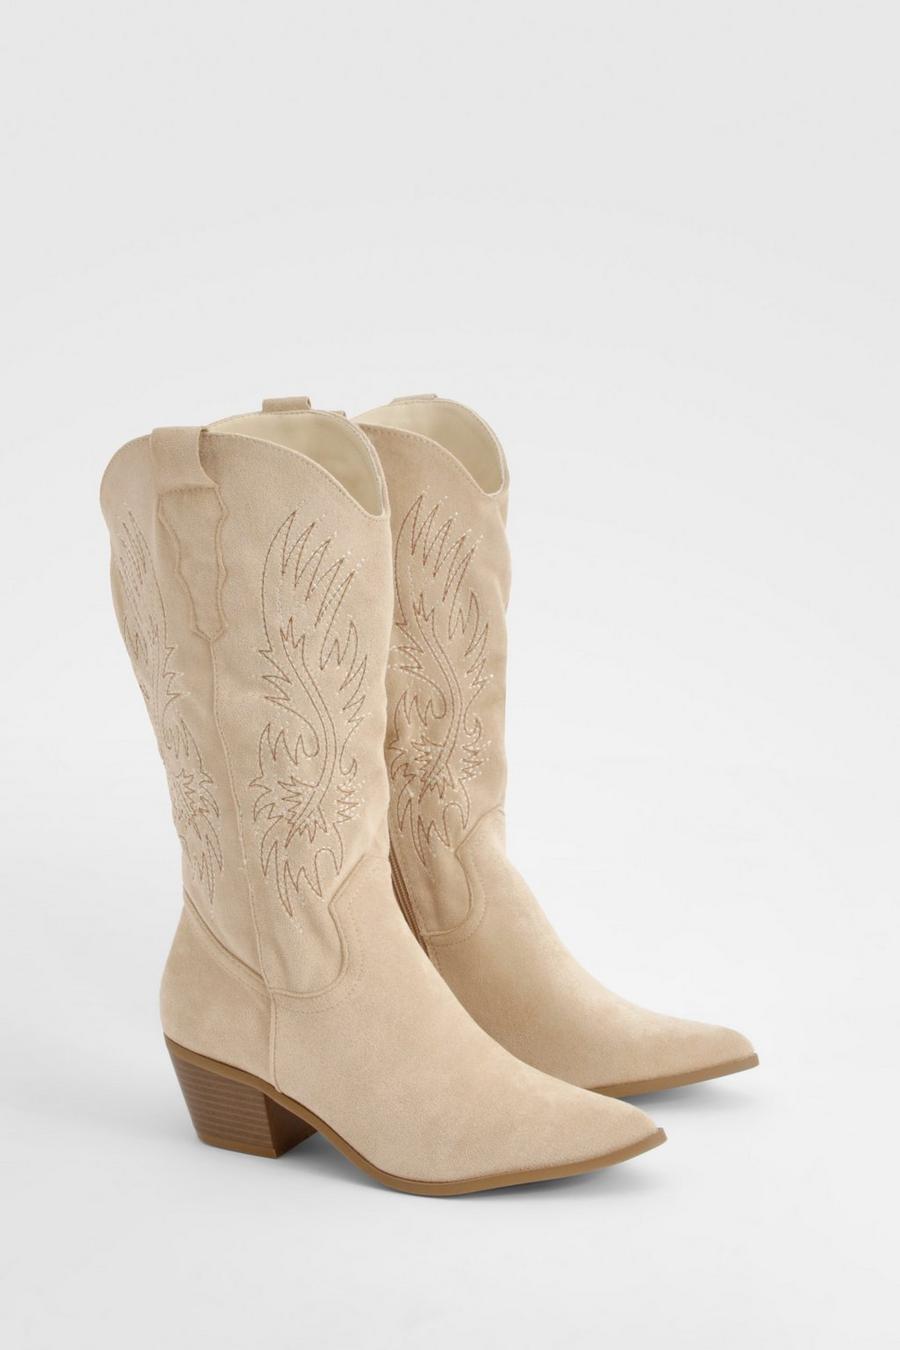 Beige Embroidered Calf High Western Boots